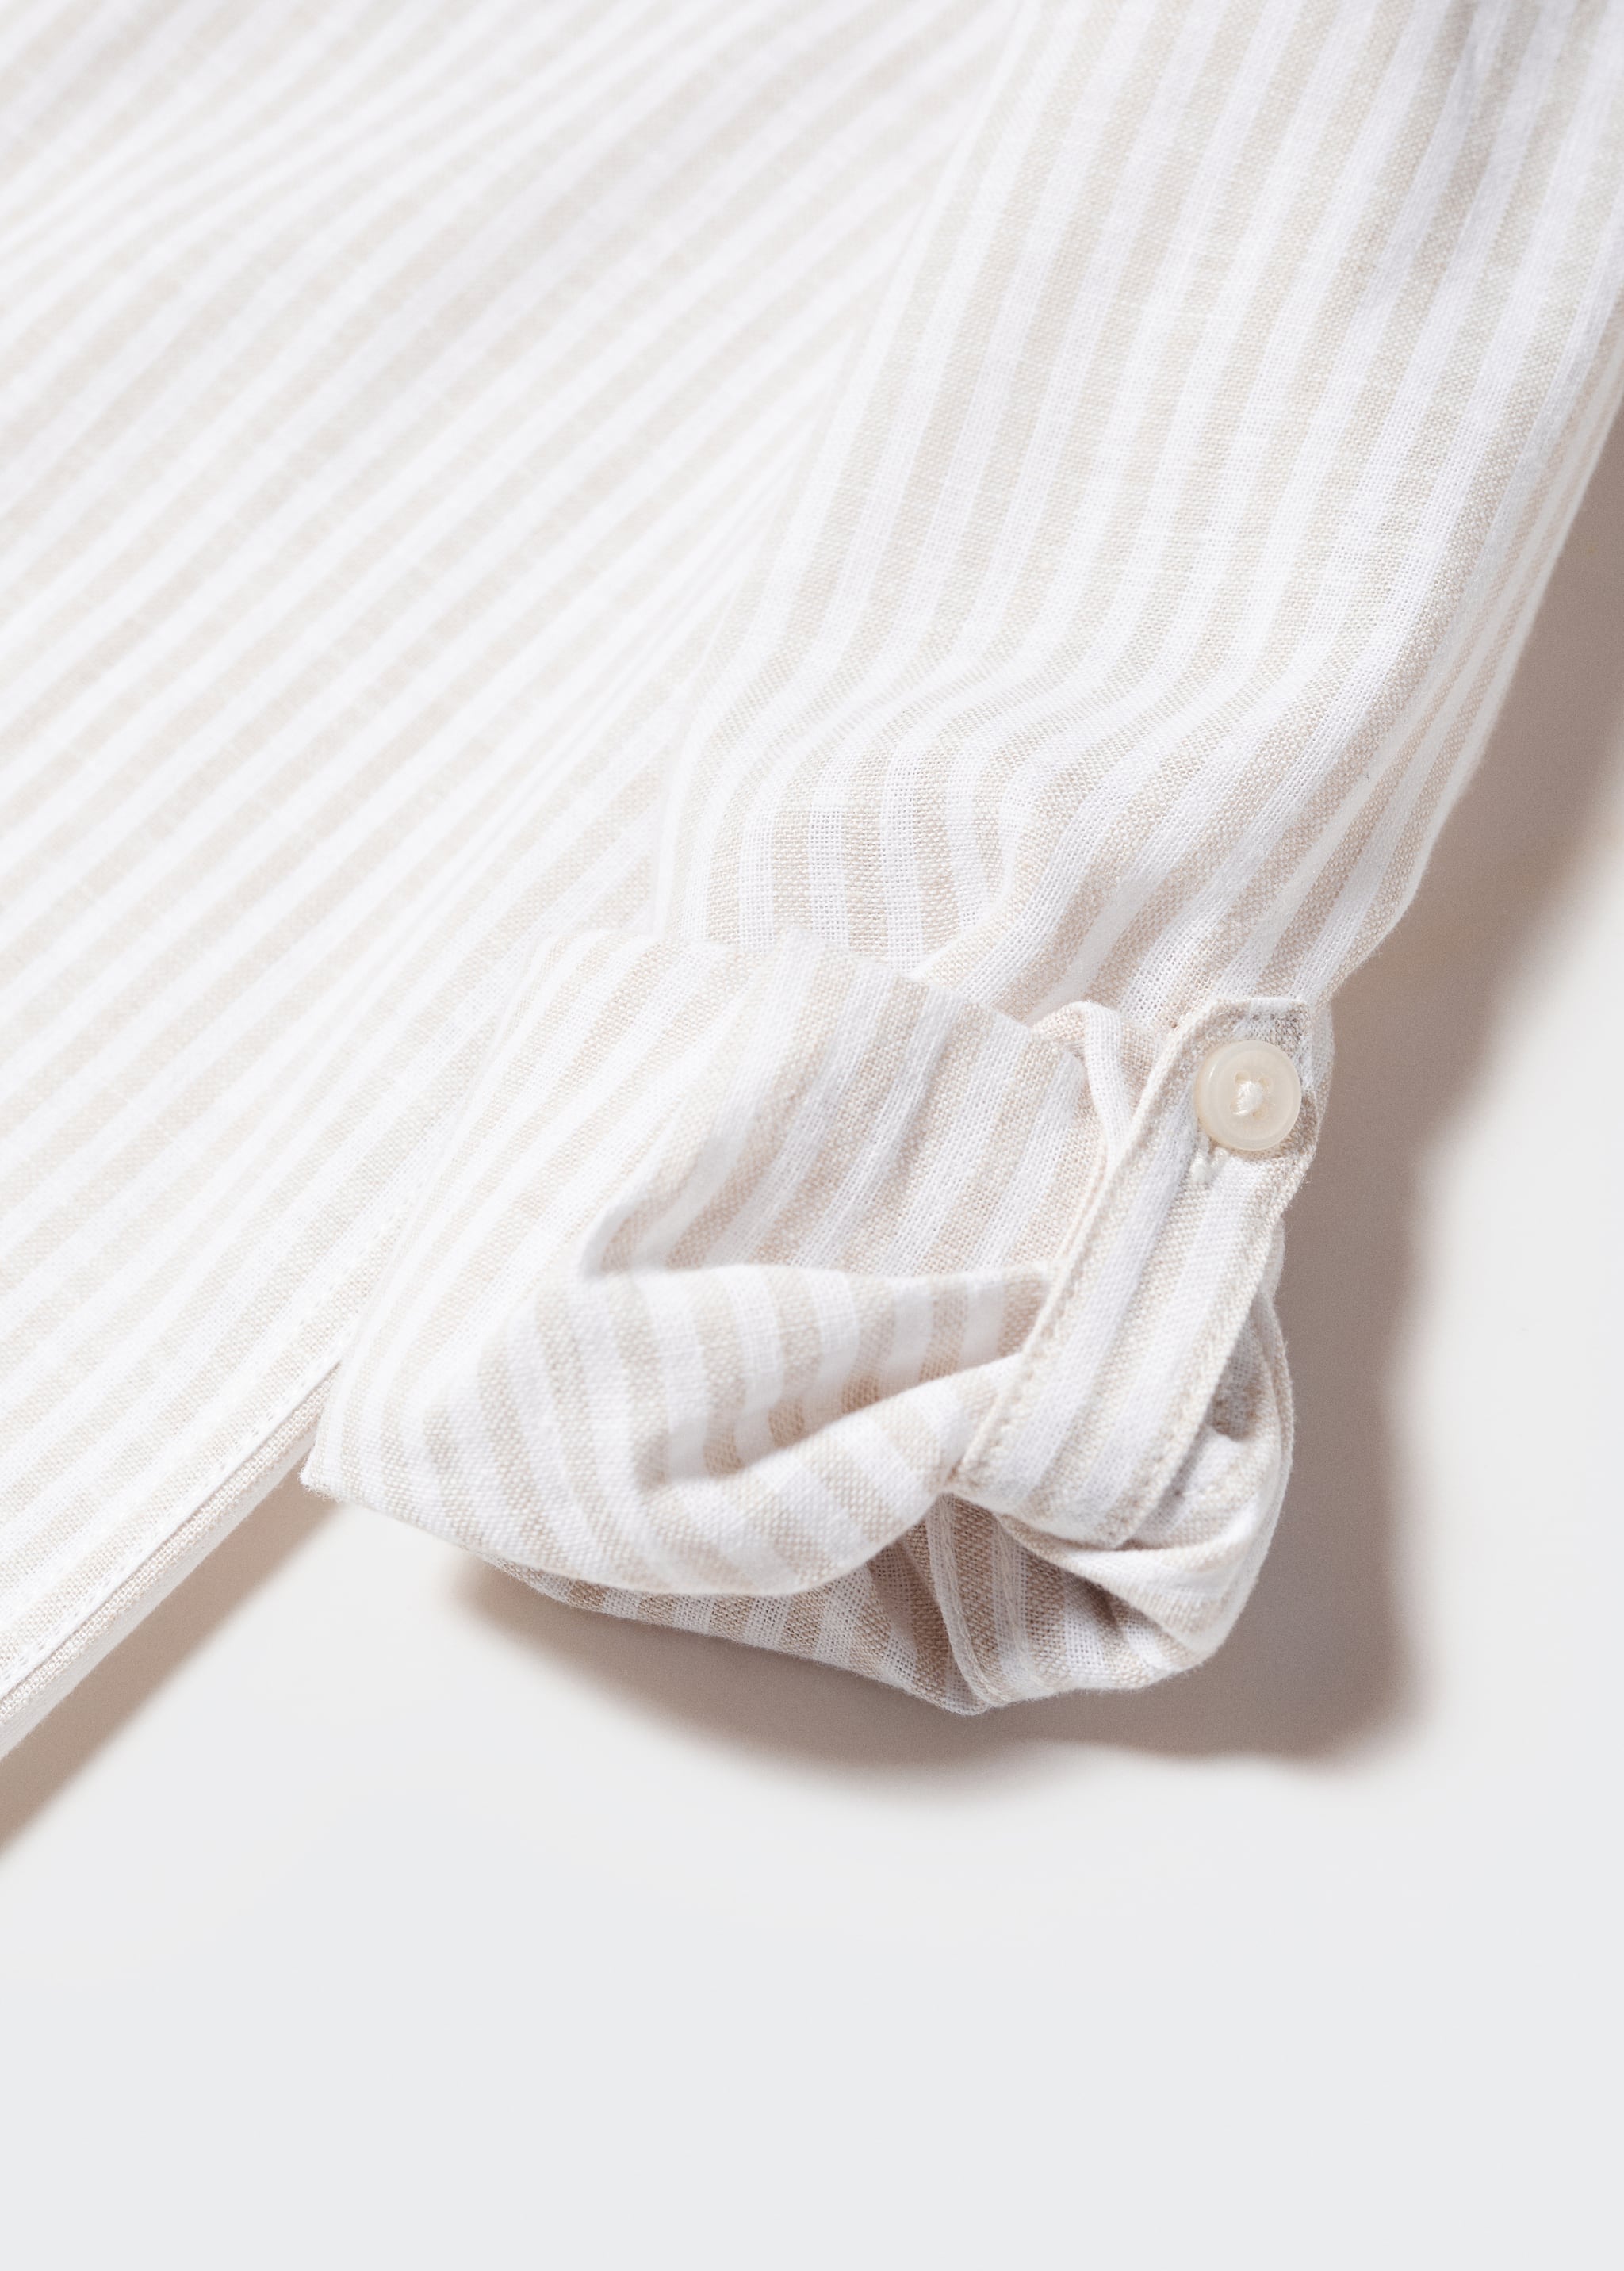 Striped shirt - Details of the article 8